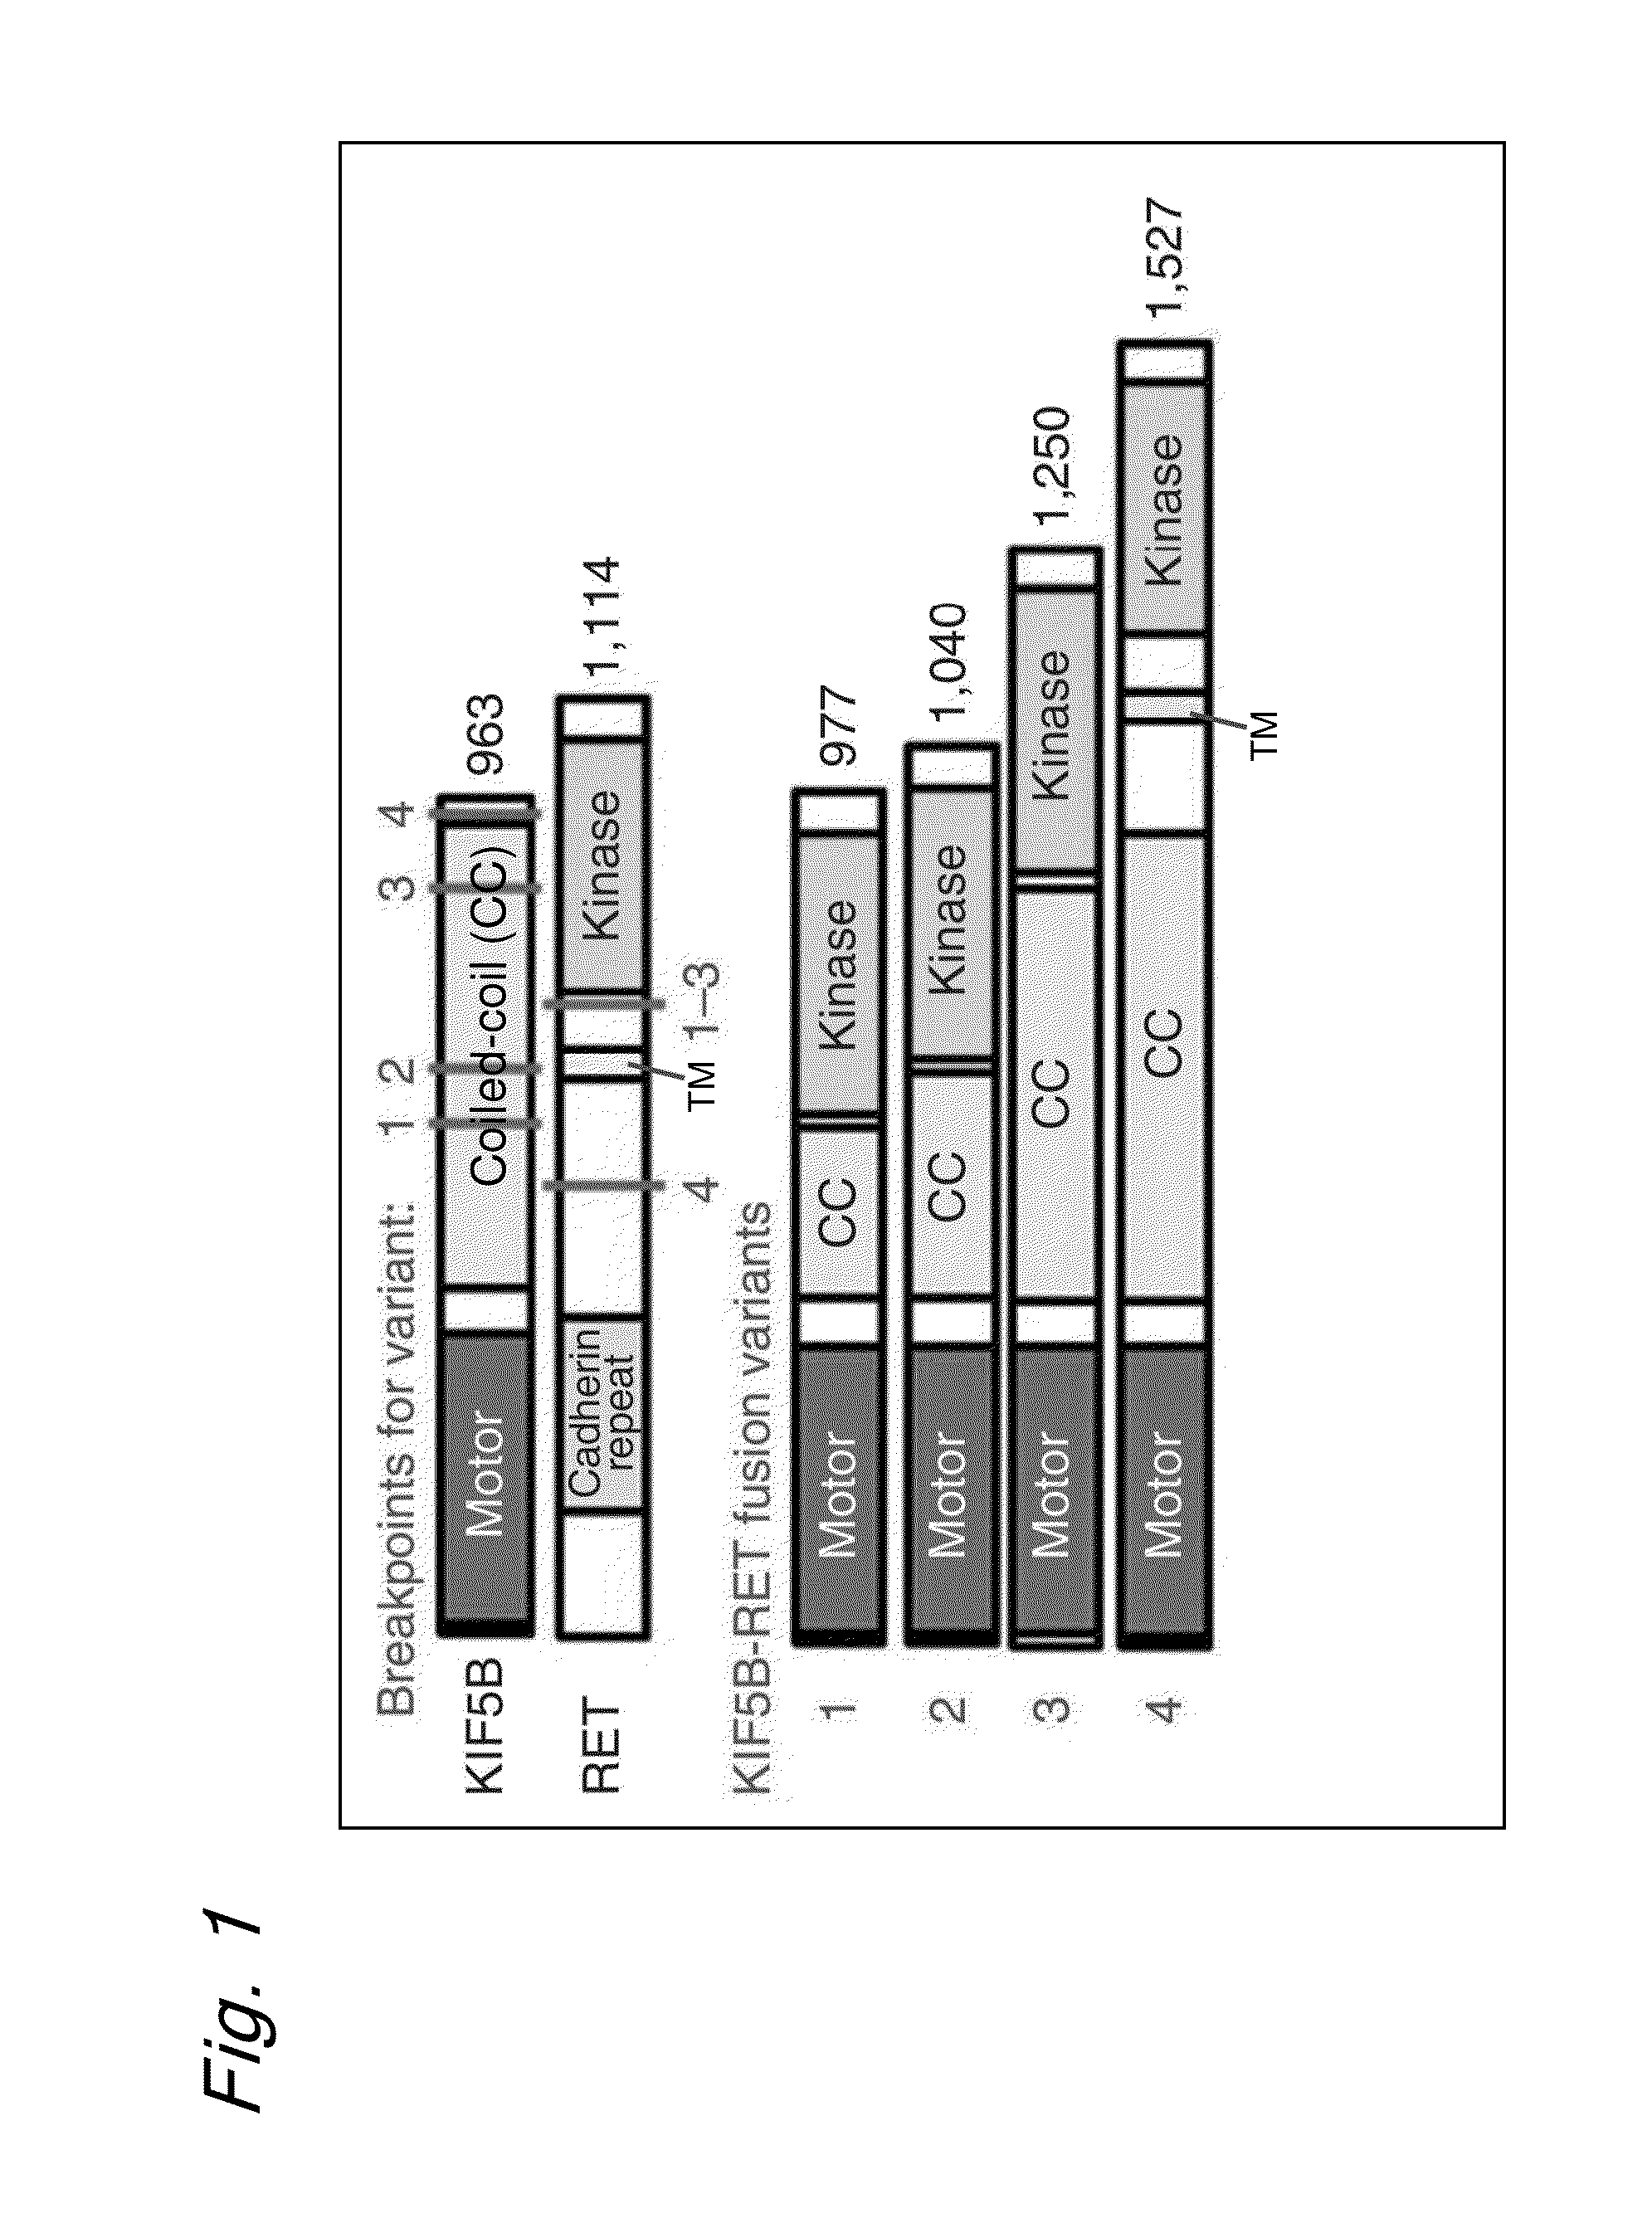 FUSION GENE OF Kif5b GENE AND Ret GENE, AND METHOD FOR DETERMINING EFFECTIVENESS OF CANCER TREATMENT TARGETING FUSION GENE